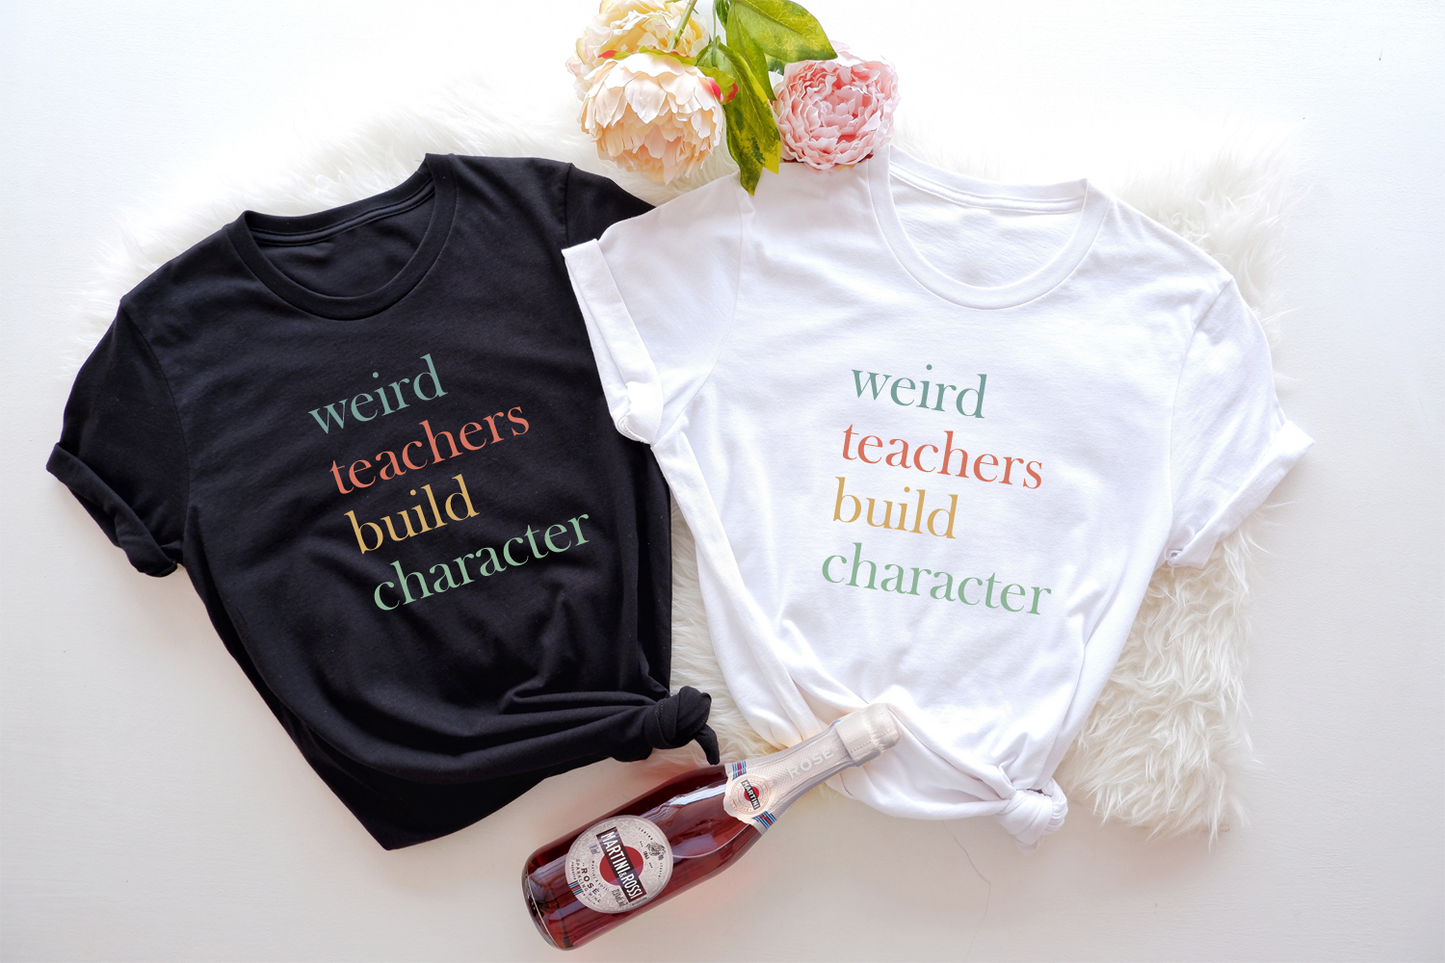 Celebrate the unique and inspiring teachers in your life with our fun and lighthearted "Weird Teachers Build Character" shirt.